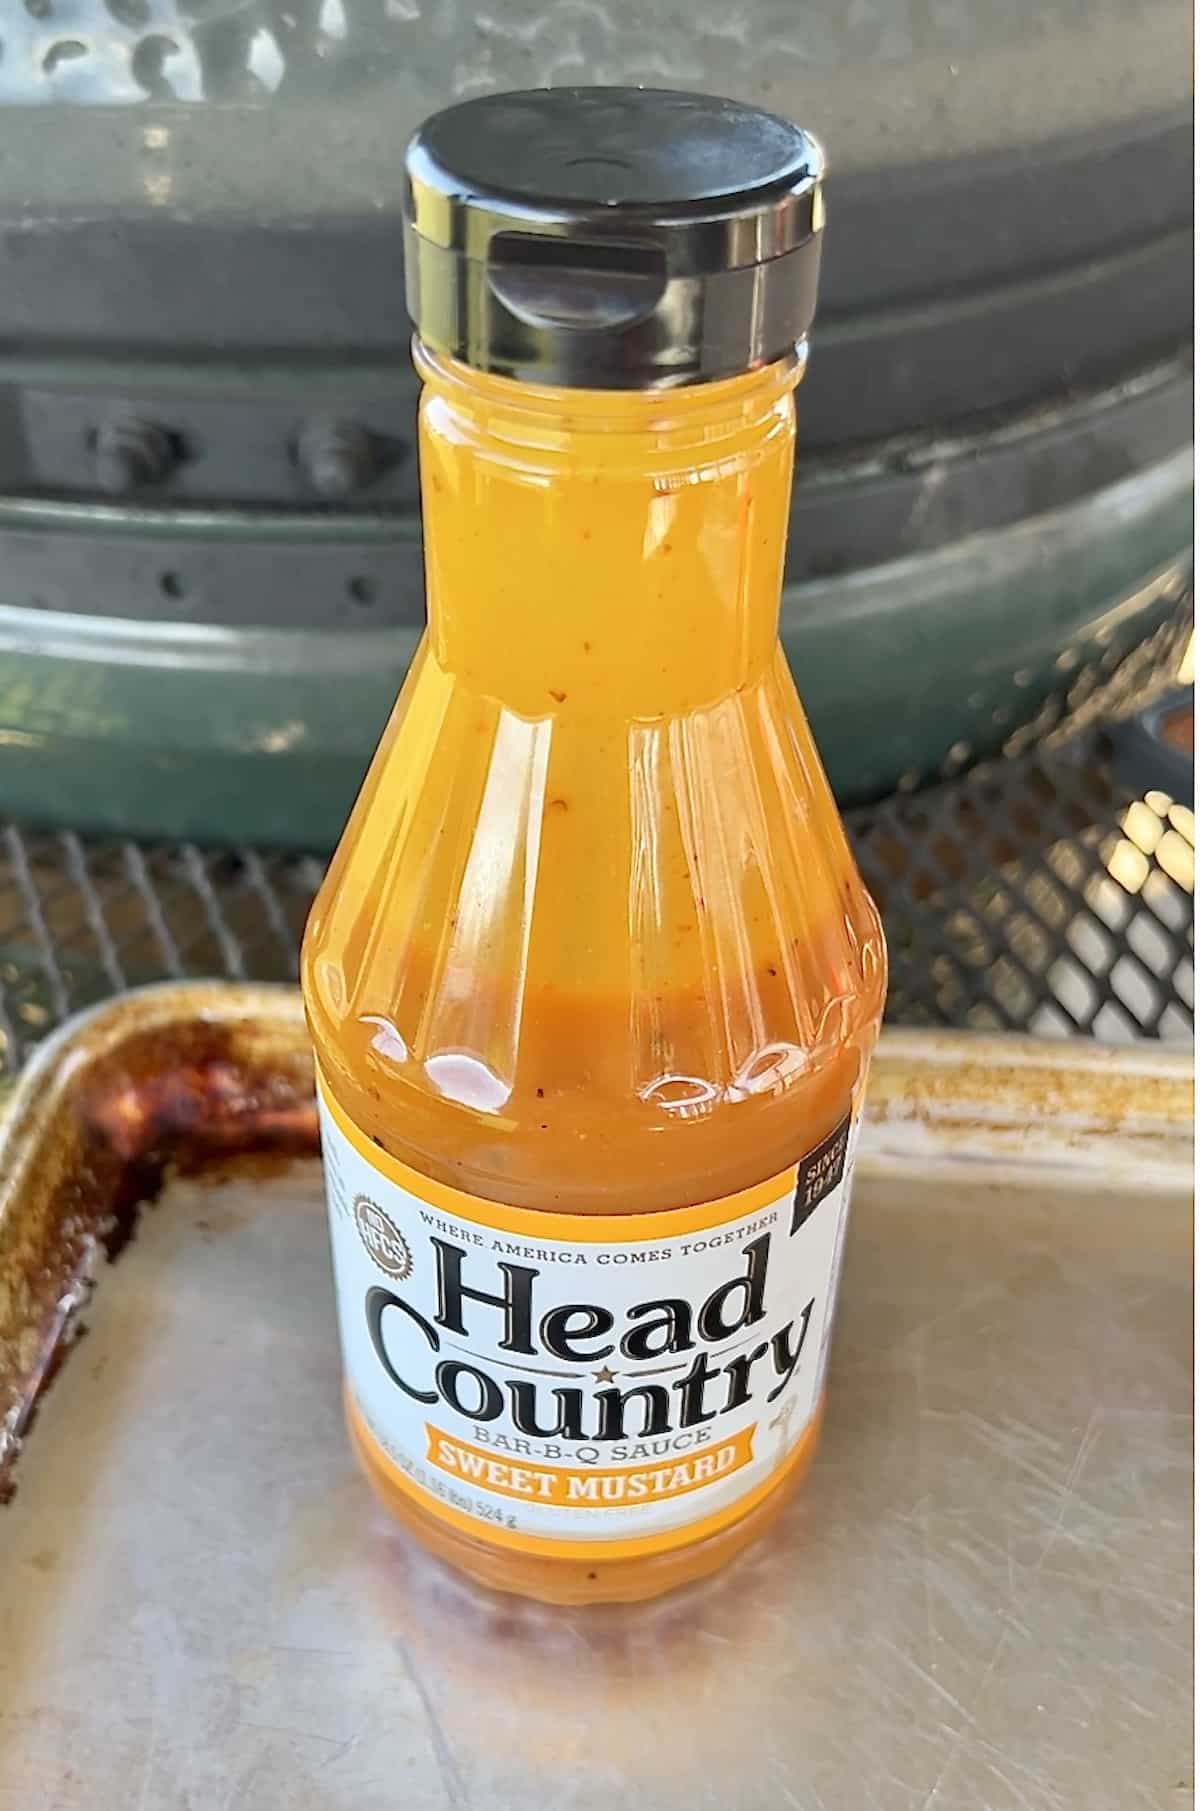 Head Country Sweet Mustard BBQ sauce in front of Big Green Egg grill.